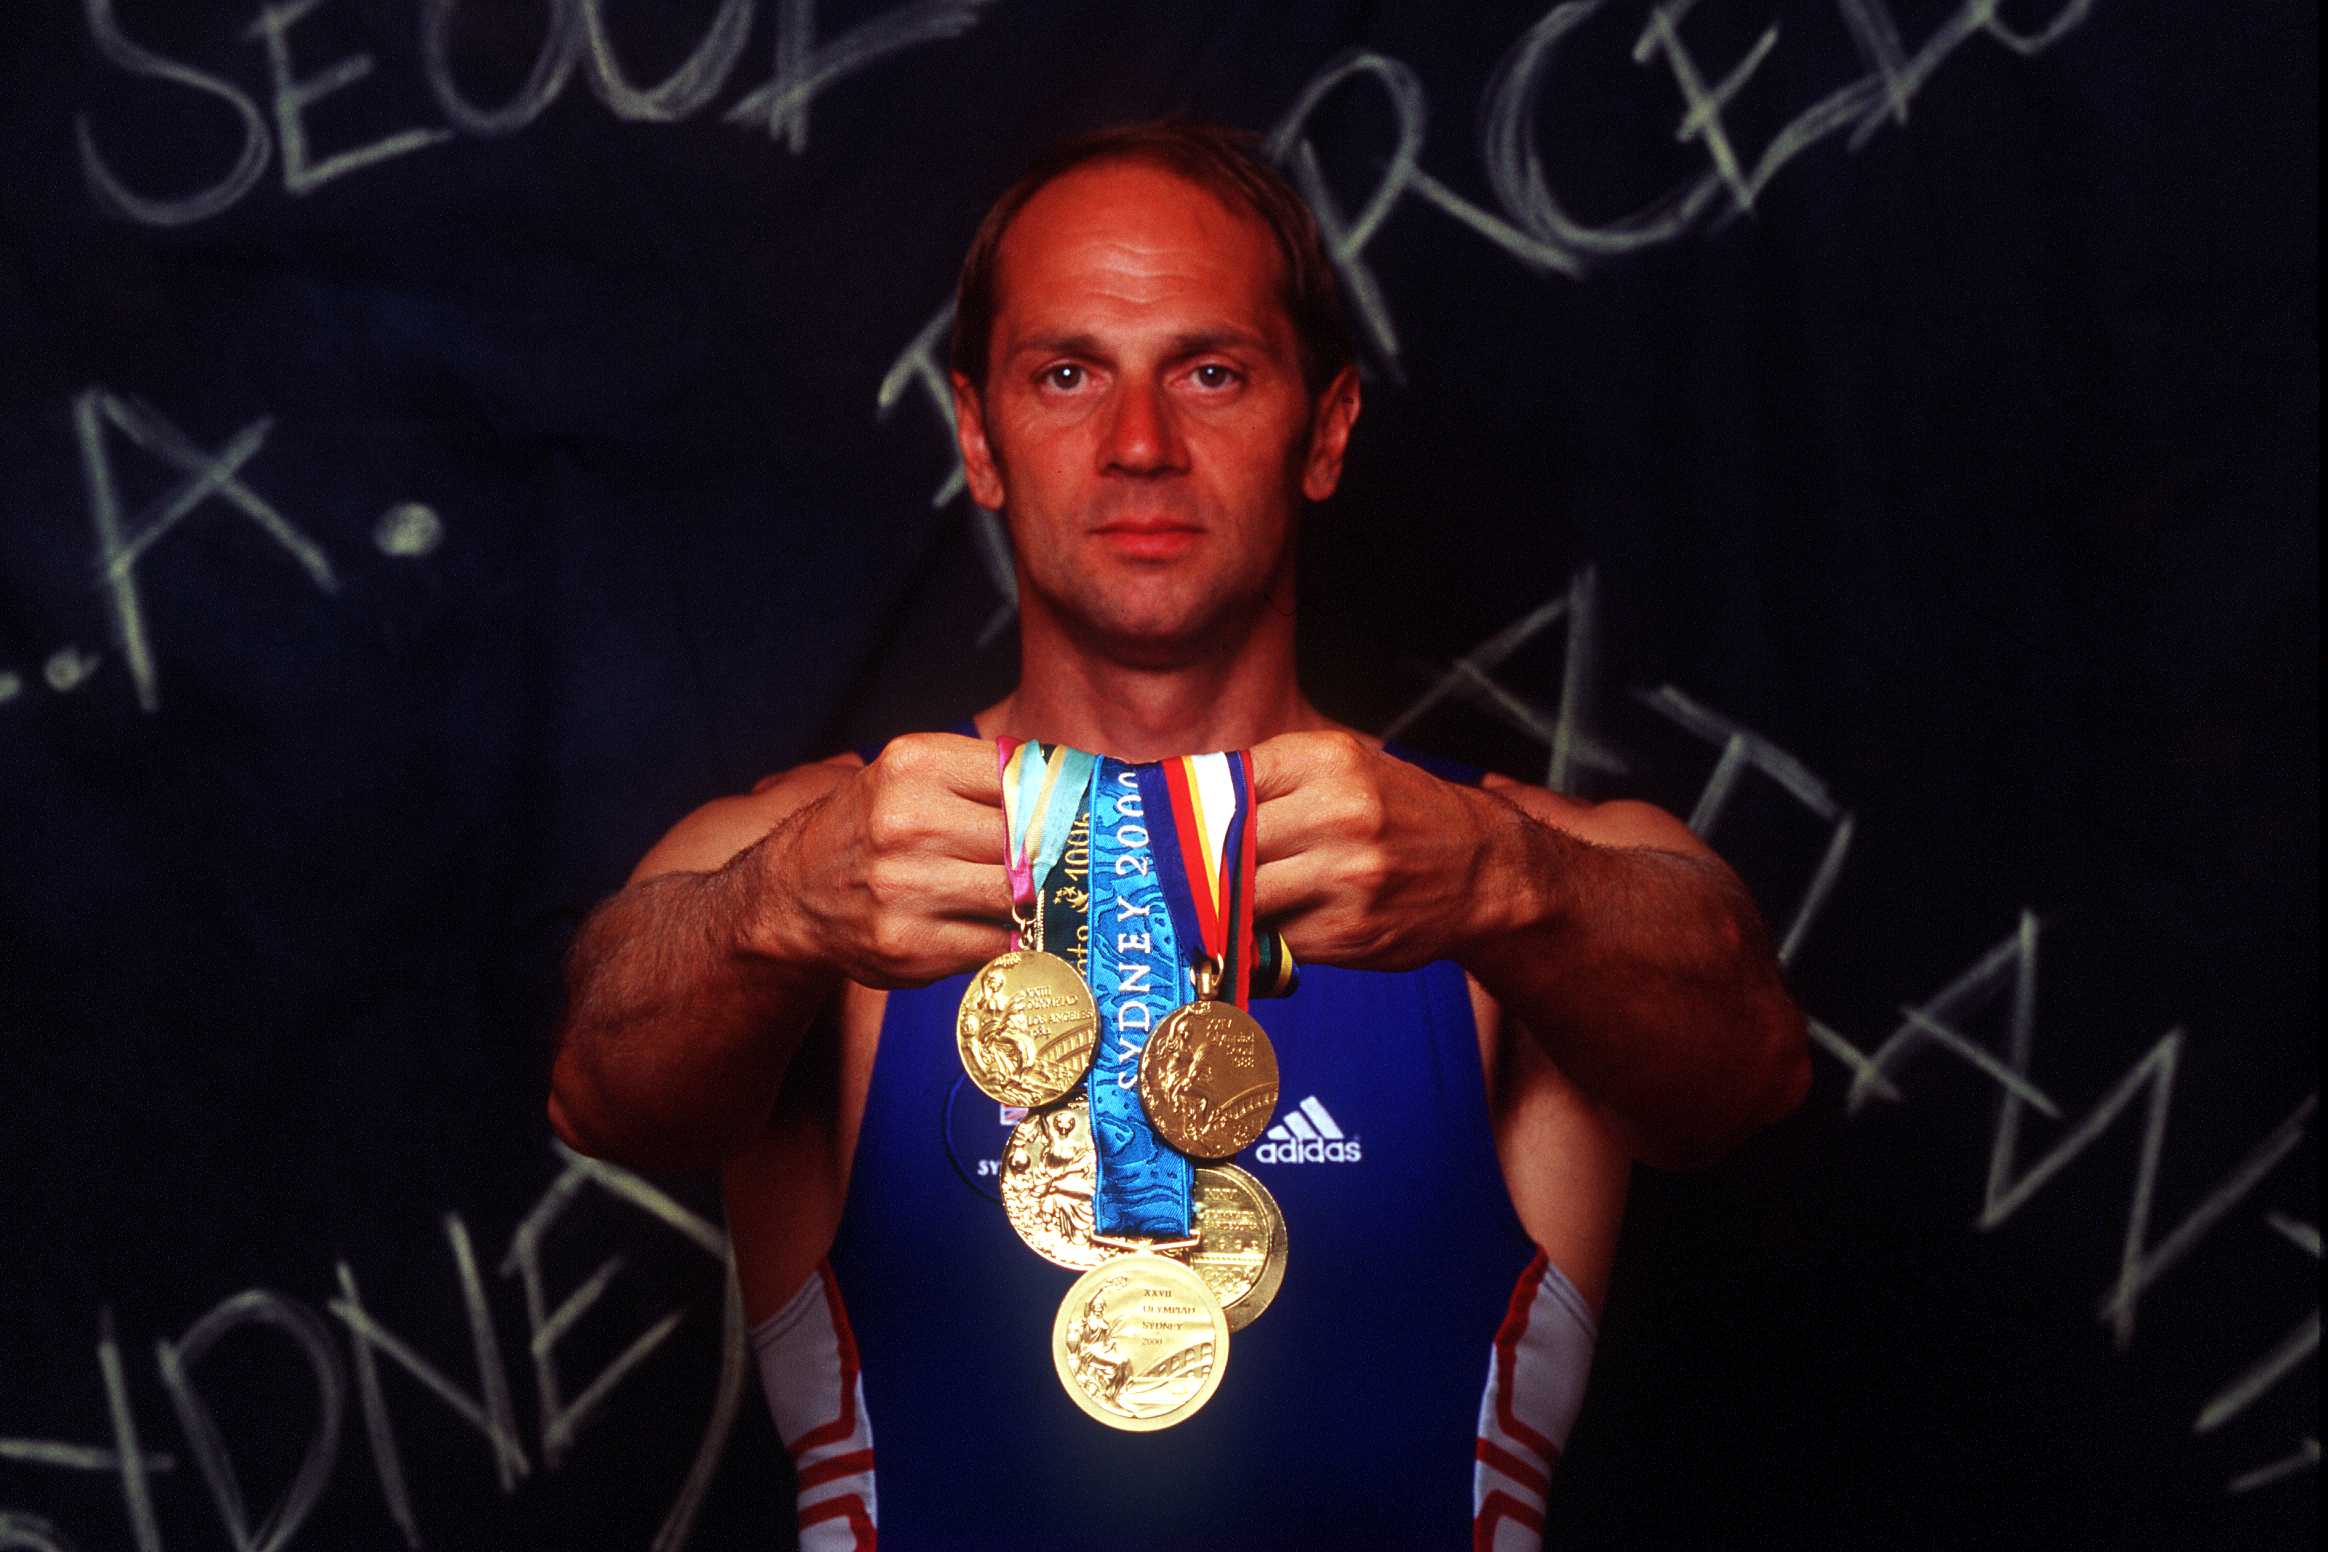 Steve Redgrave dominated rowing for two decades